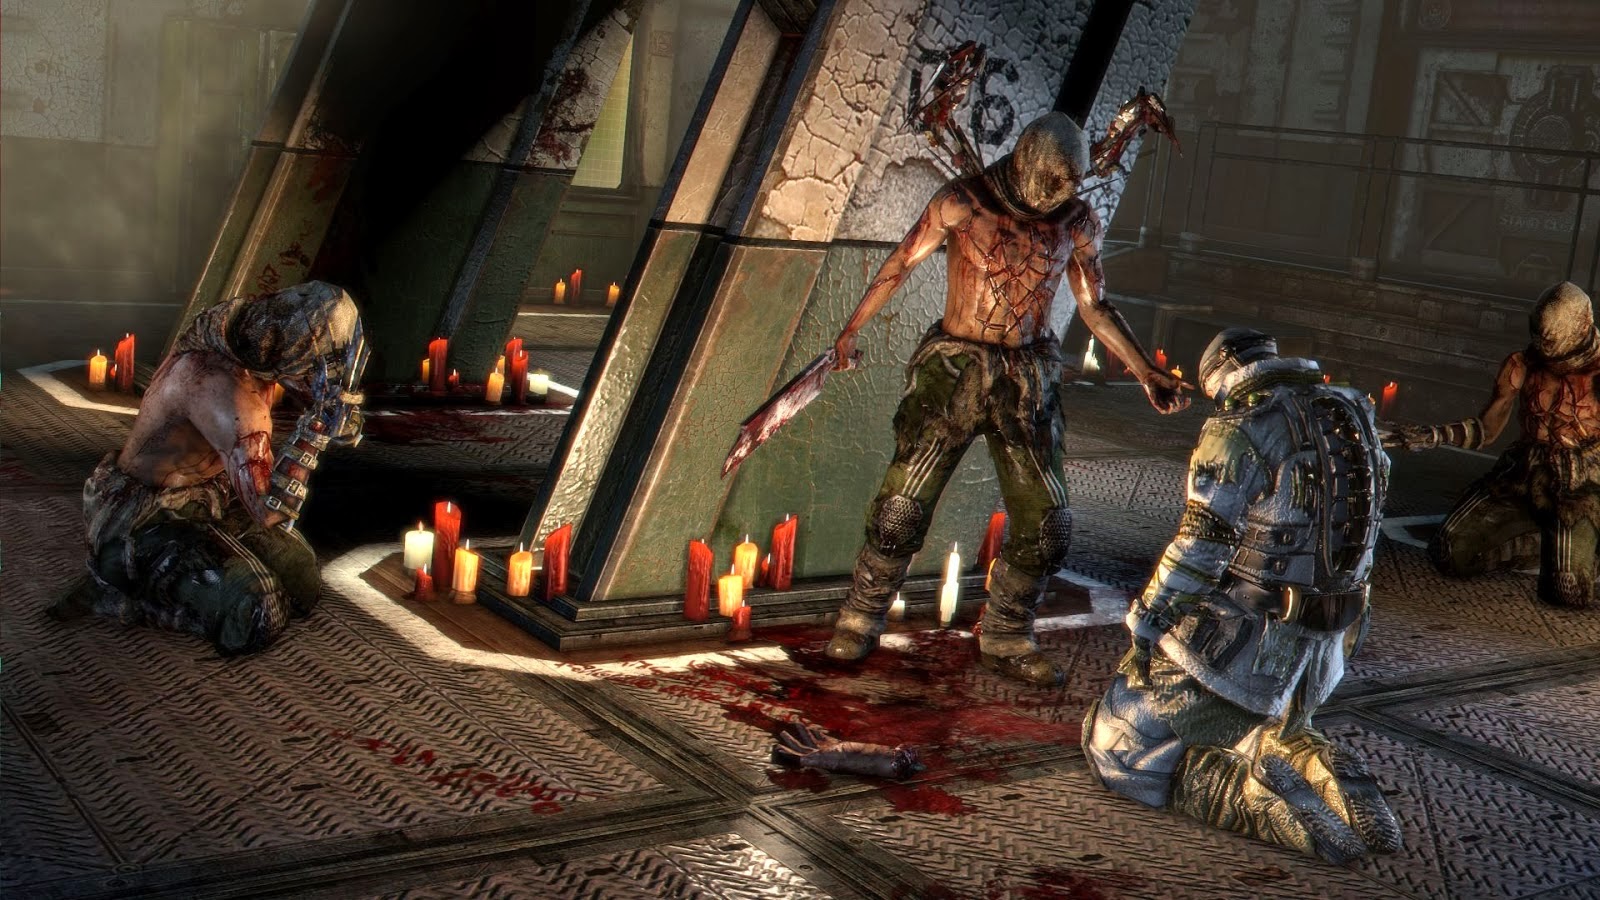 dead space 3 pc game trainer free download